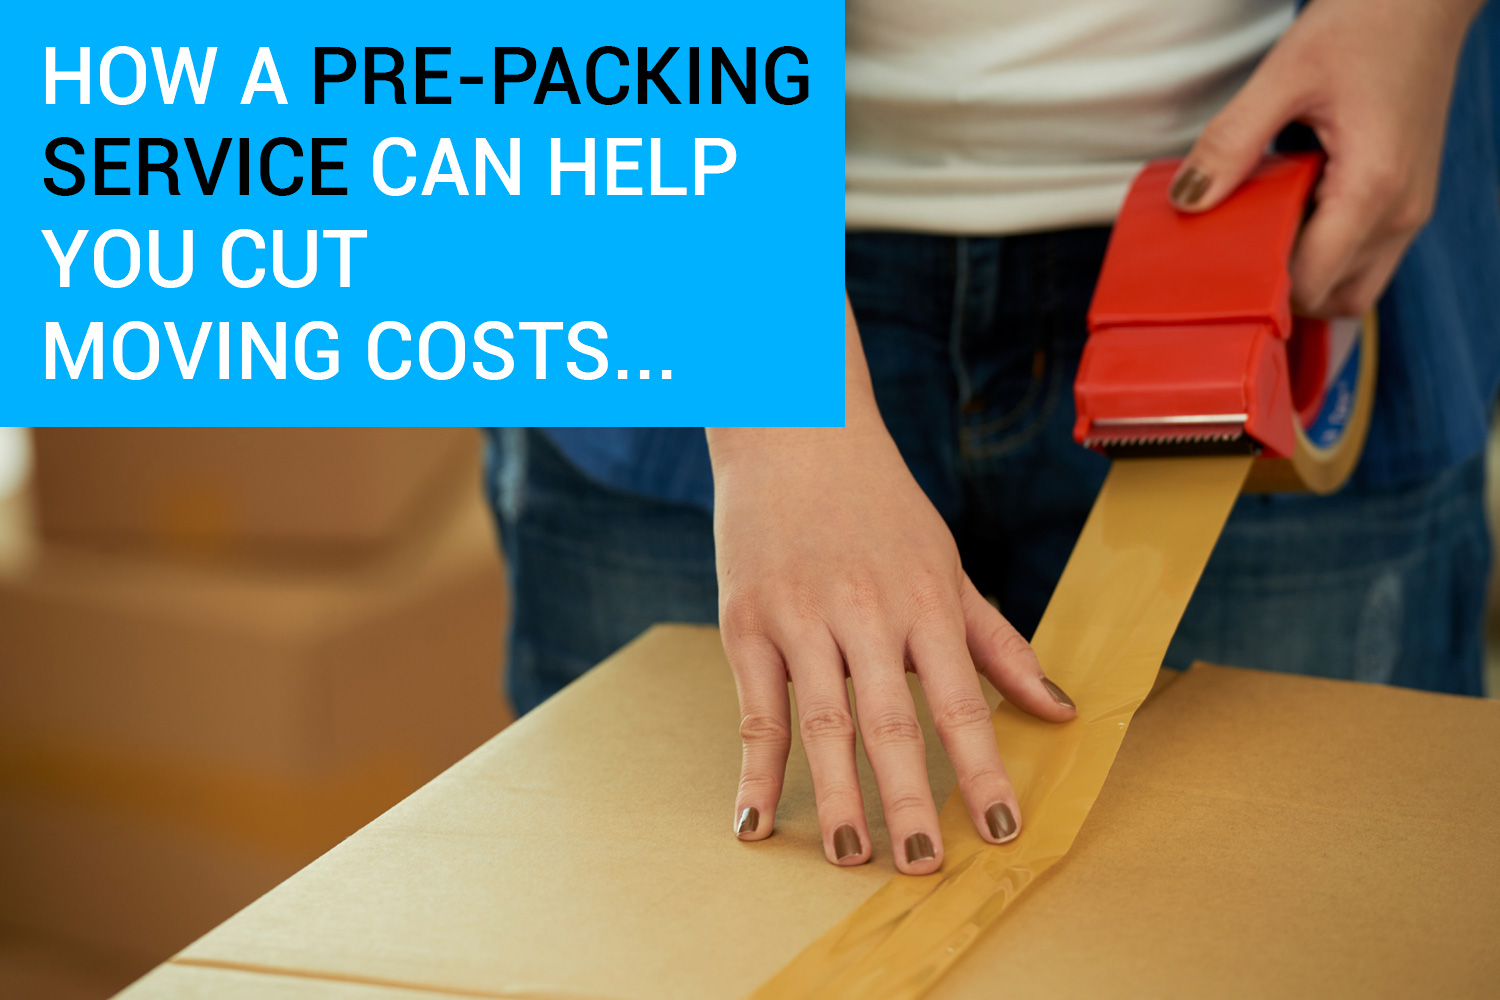 How a Pre-Packing Service Can Help You Cut Moving Costs